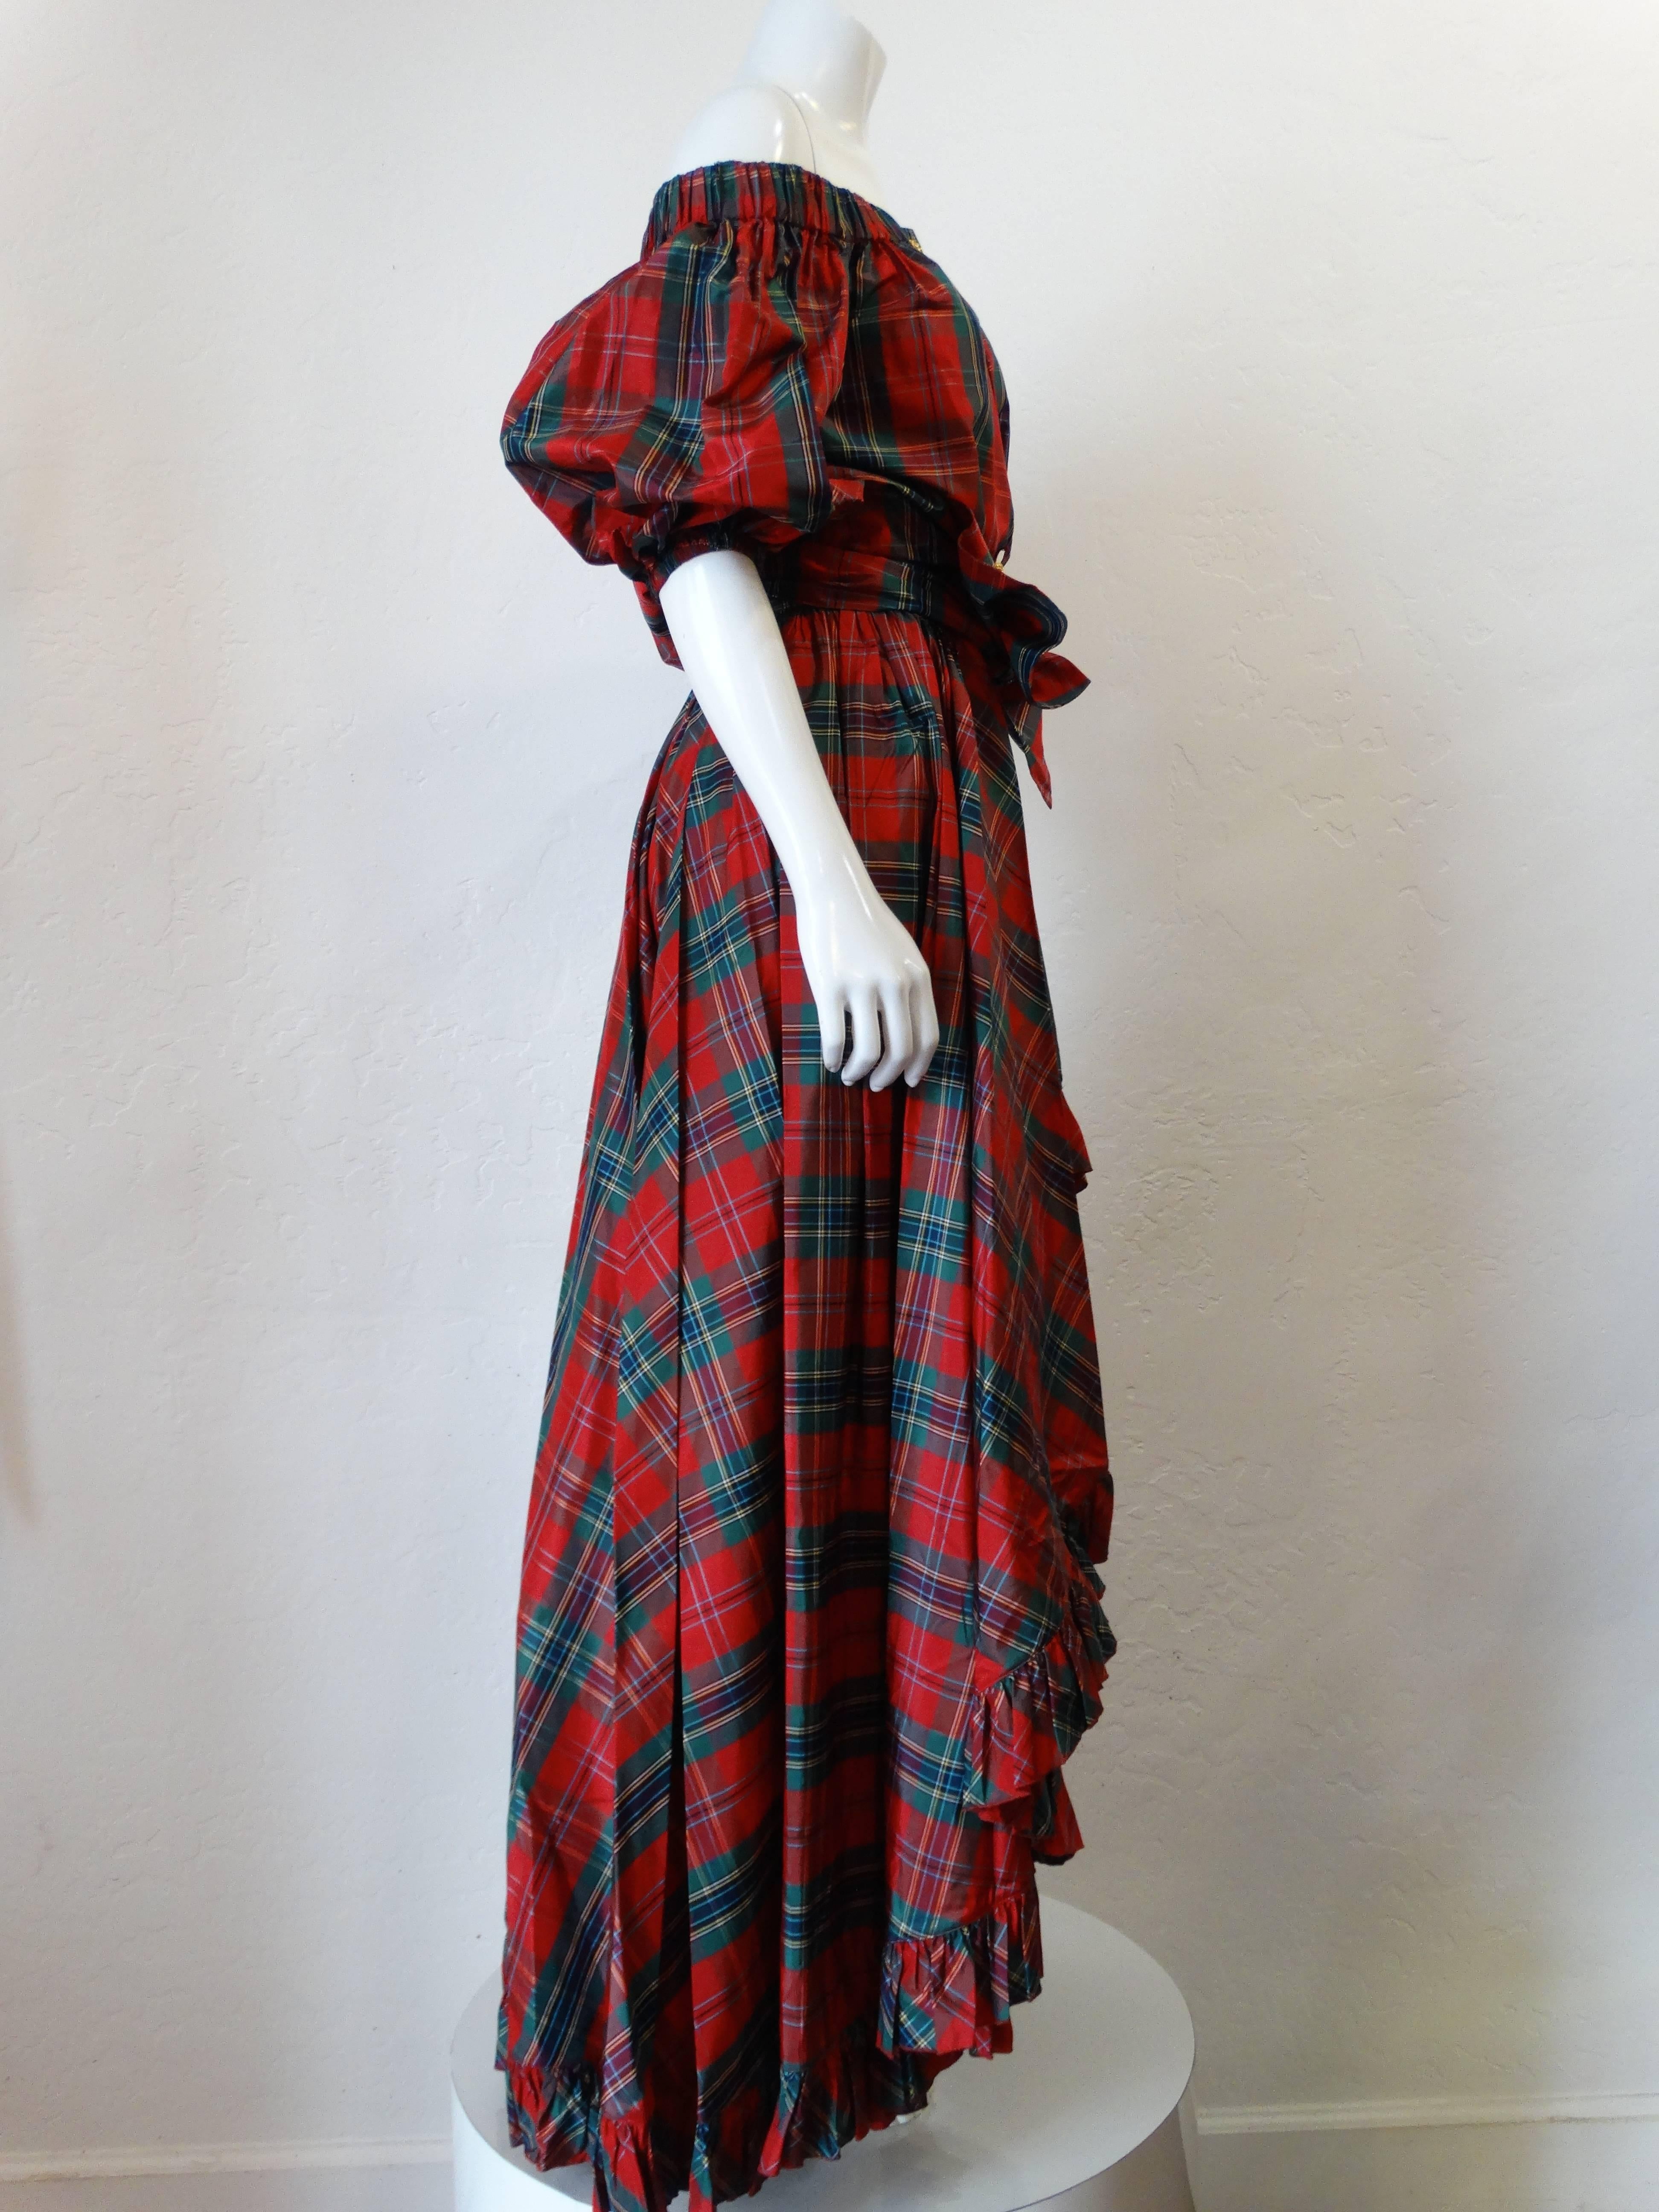 Rare late 1970's Saint Laurent Rive Gauche tartan plaid silk blouse and skirt. Blouse features 3 large gold buttons and is off the shoulders. Skirt is high-waisted with a thick ruffled hem , short to long hem.Long sash belt attached. 
Size EU skirt